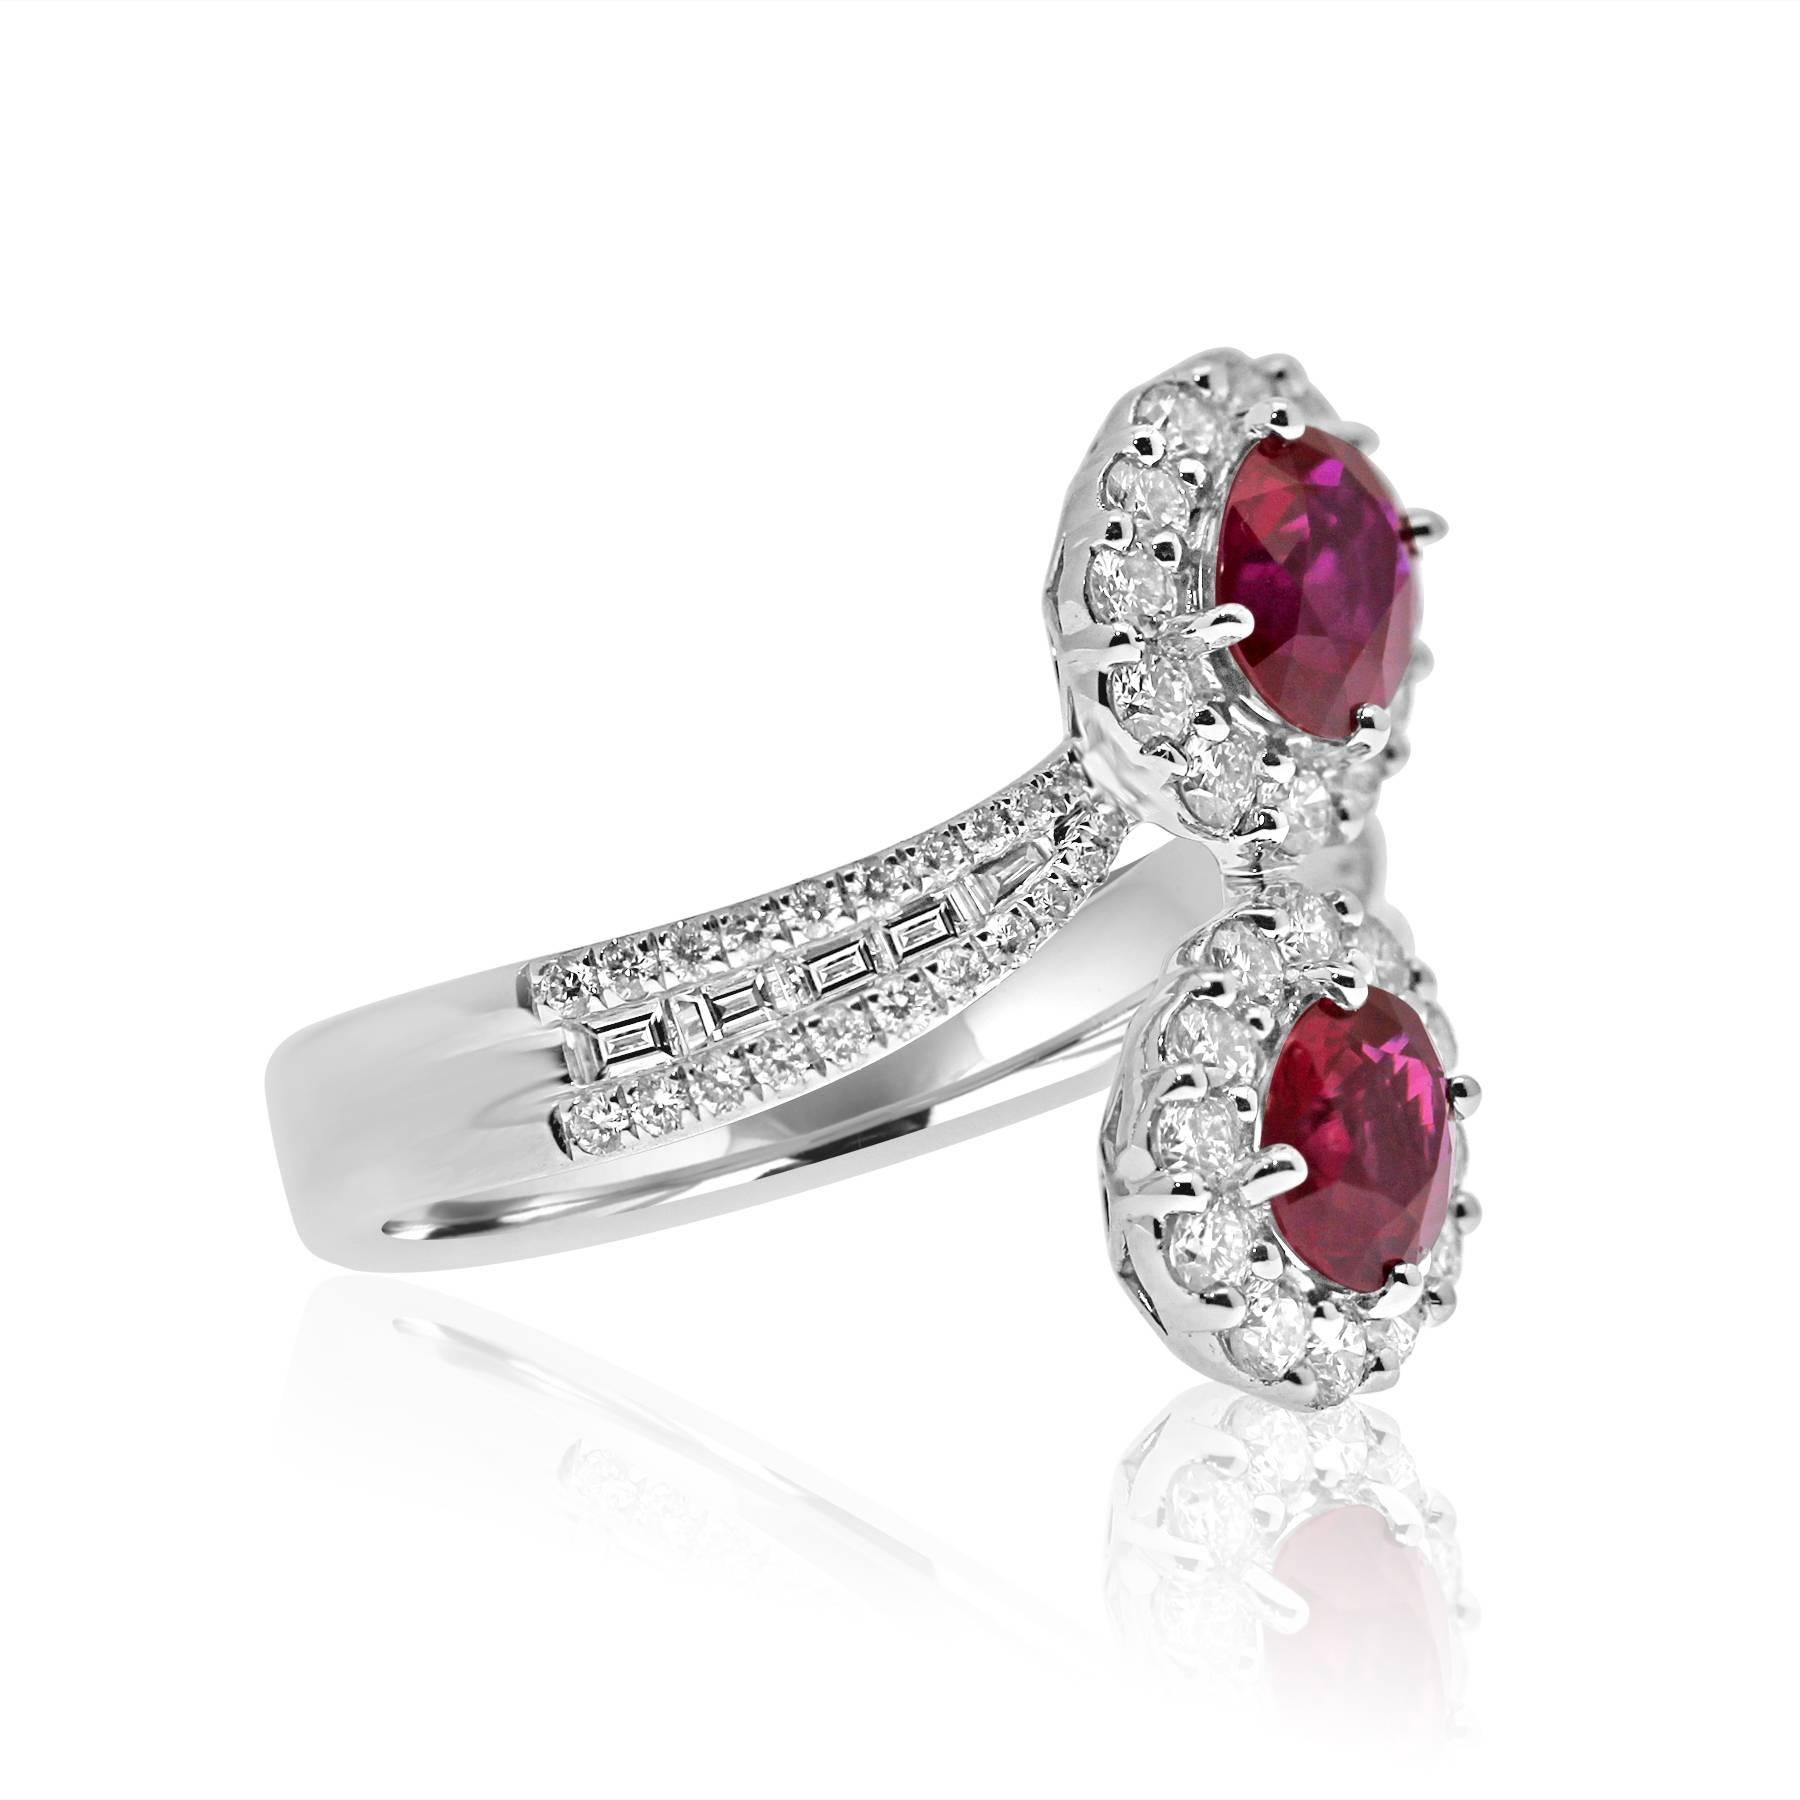 platinum  ring featuring two rubies gemstones of 1.62ct total in a design called toi-et-moi which means me and you together forever.
surrounded by degraded brilliant and baguette cut diamonds of 1.05ct total to give an extra sparkly finish like only